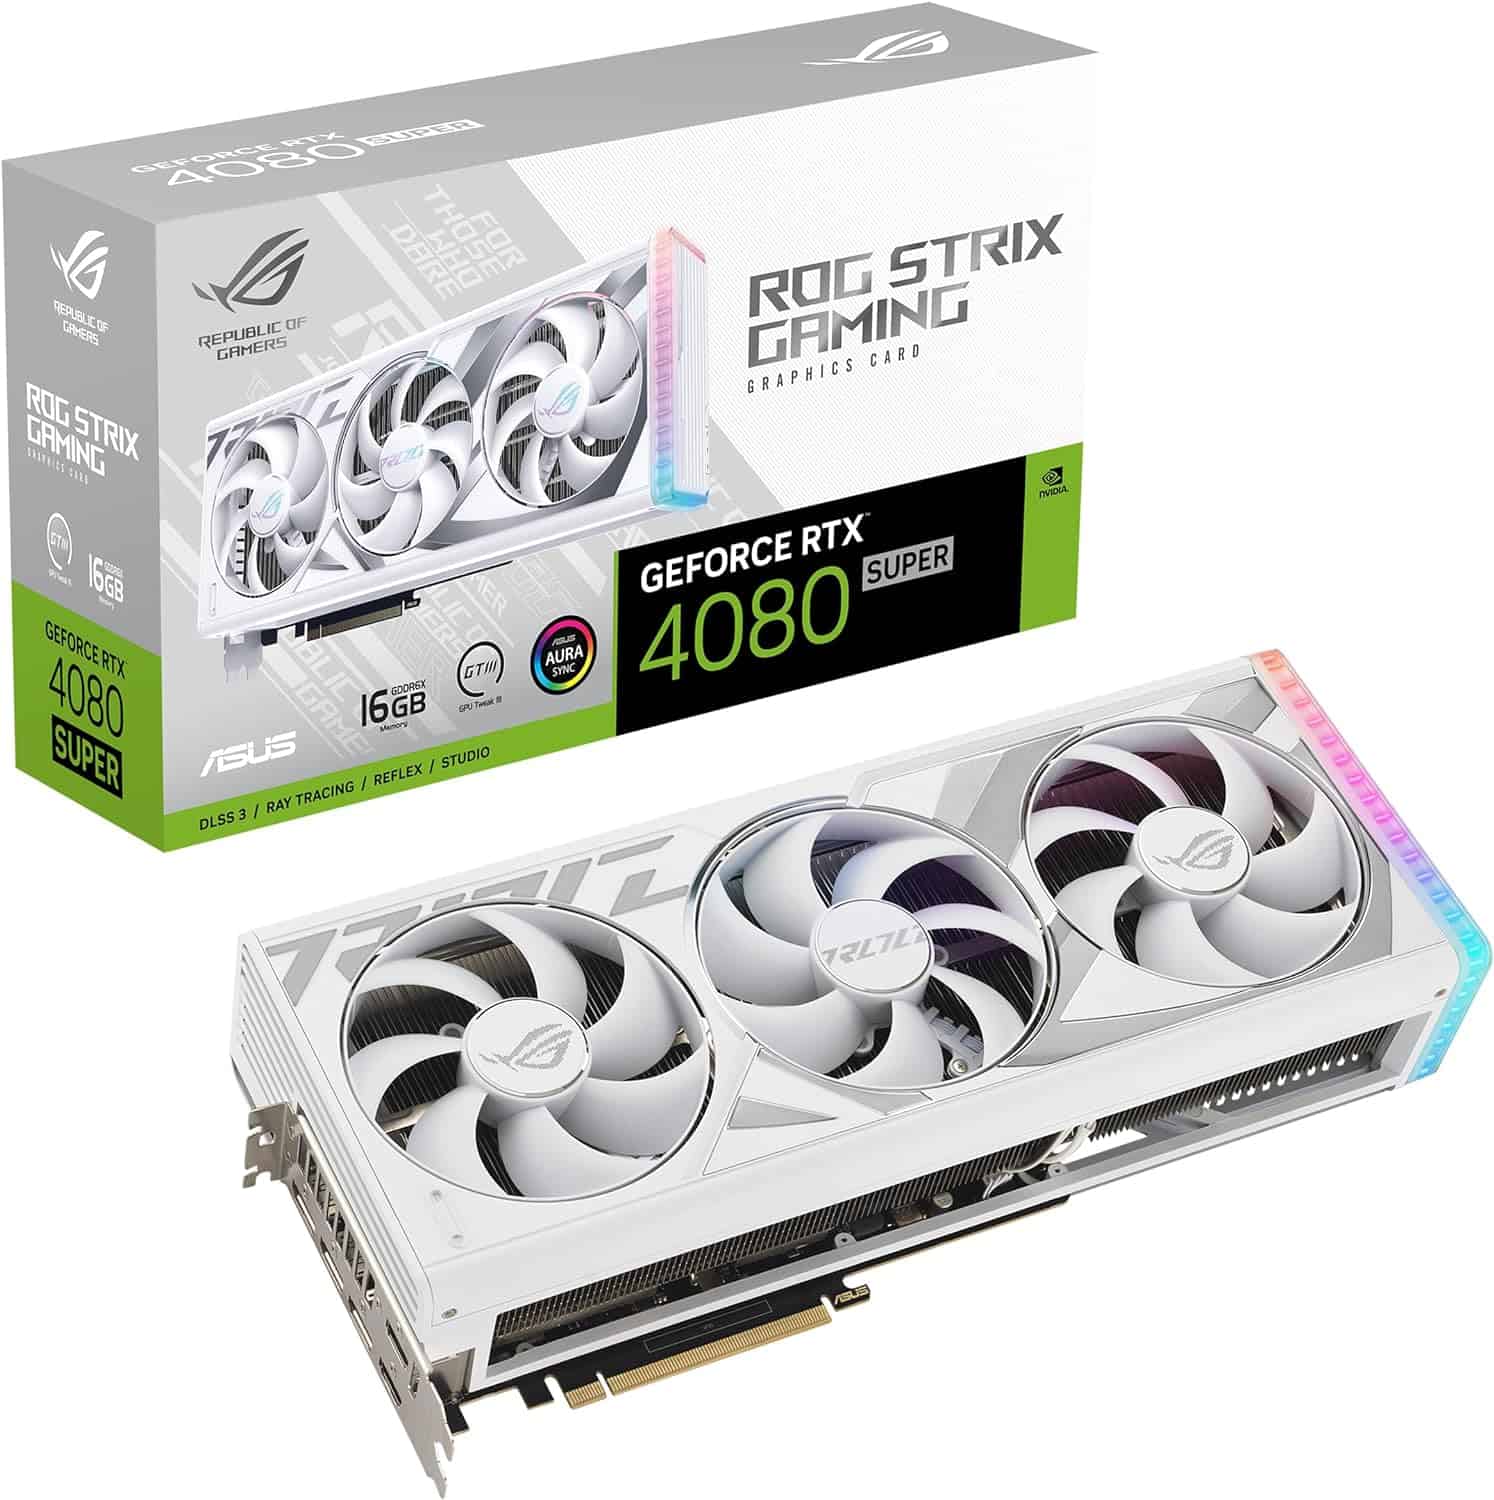 Asus ROG Strix GeForce RTX 4080 Super White OC Edition graphics card with original packaging.